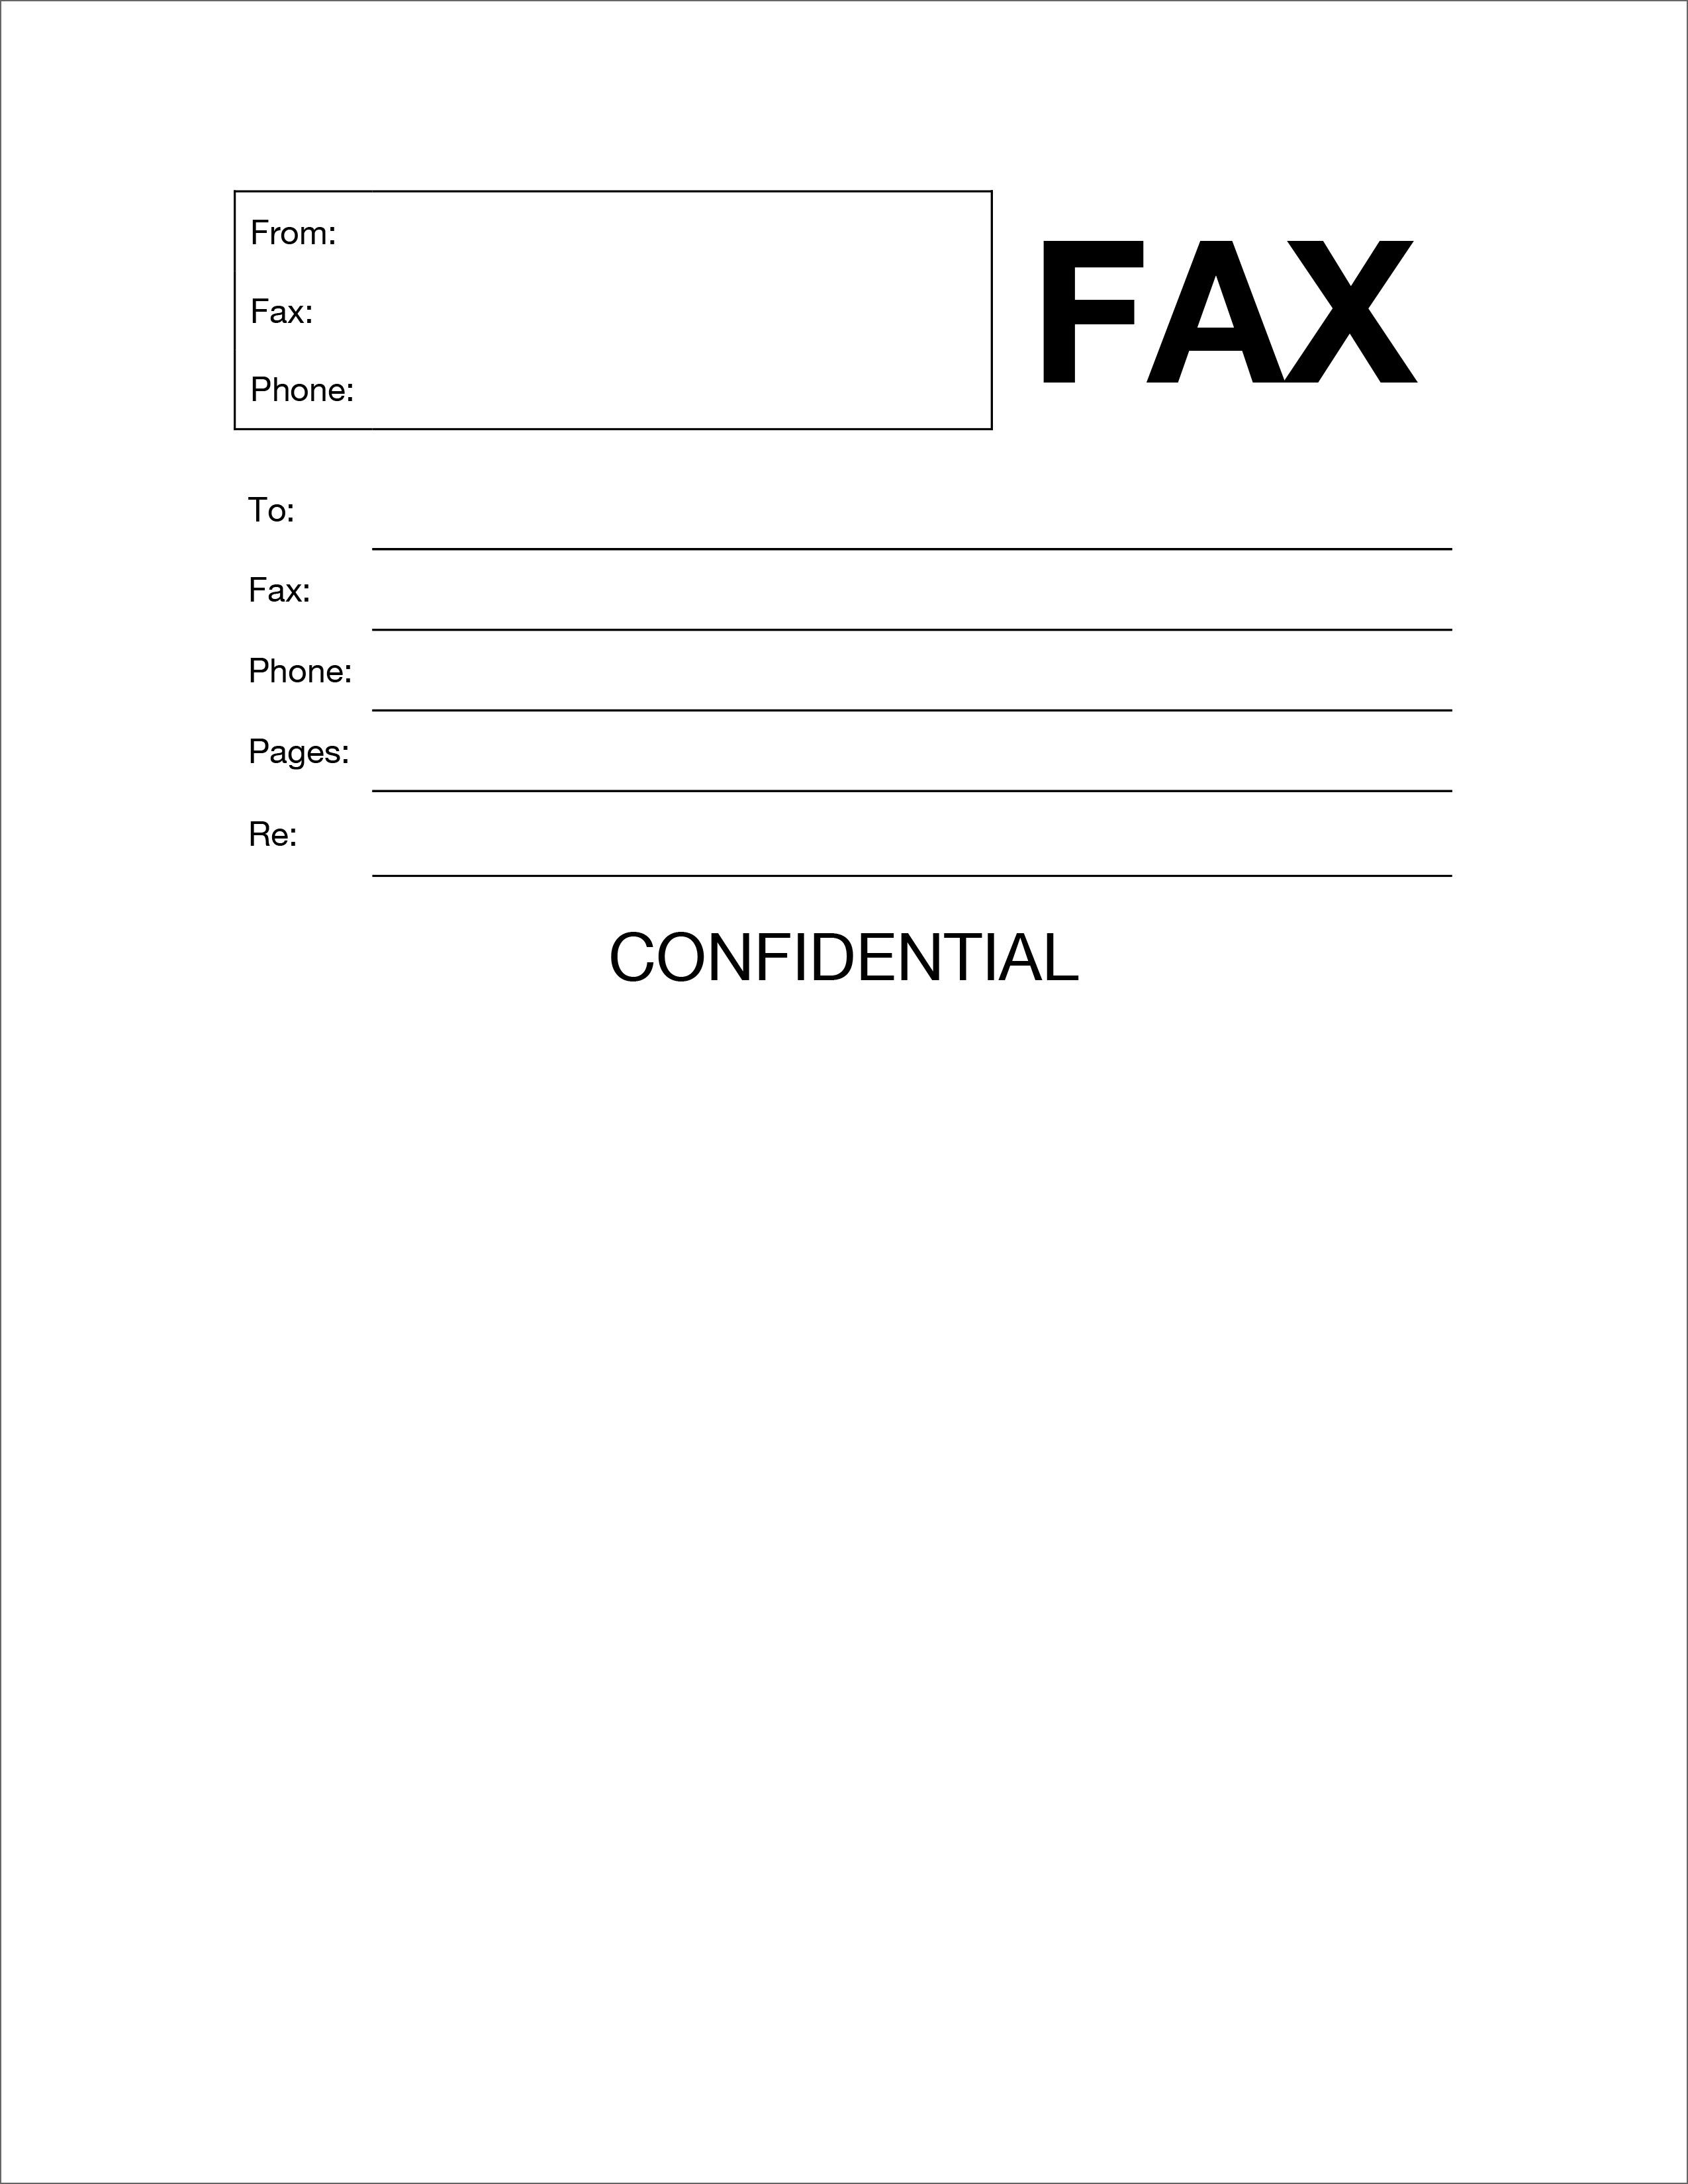 20 Free Fax Cover Templates / Sheets In Microsoft Office DocX Intended For Fax Cover Sheet Template Word 2010